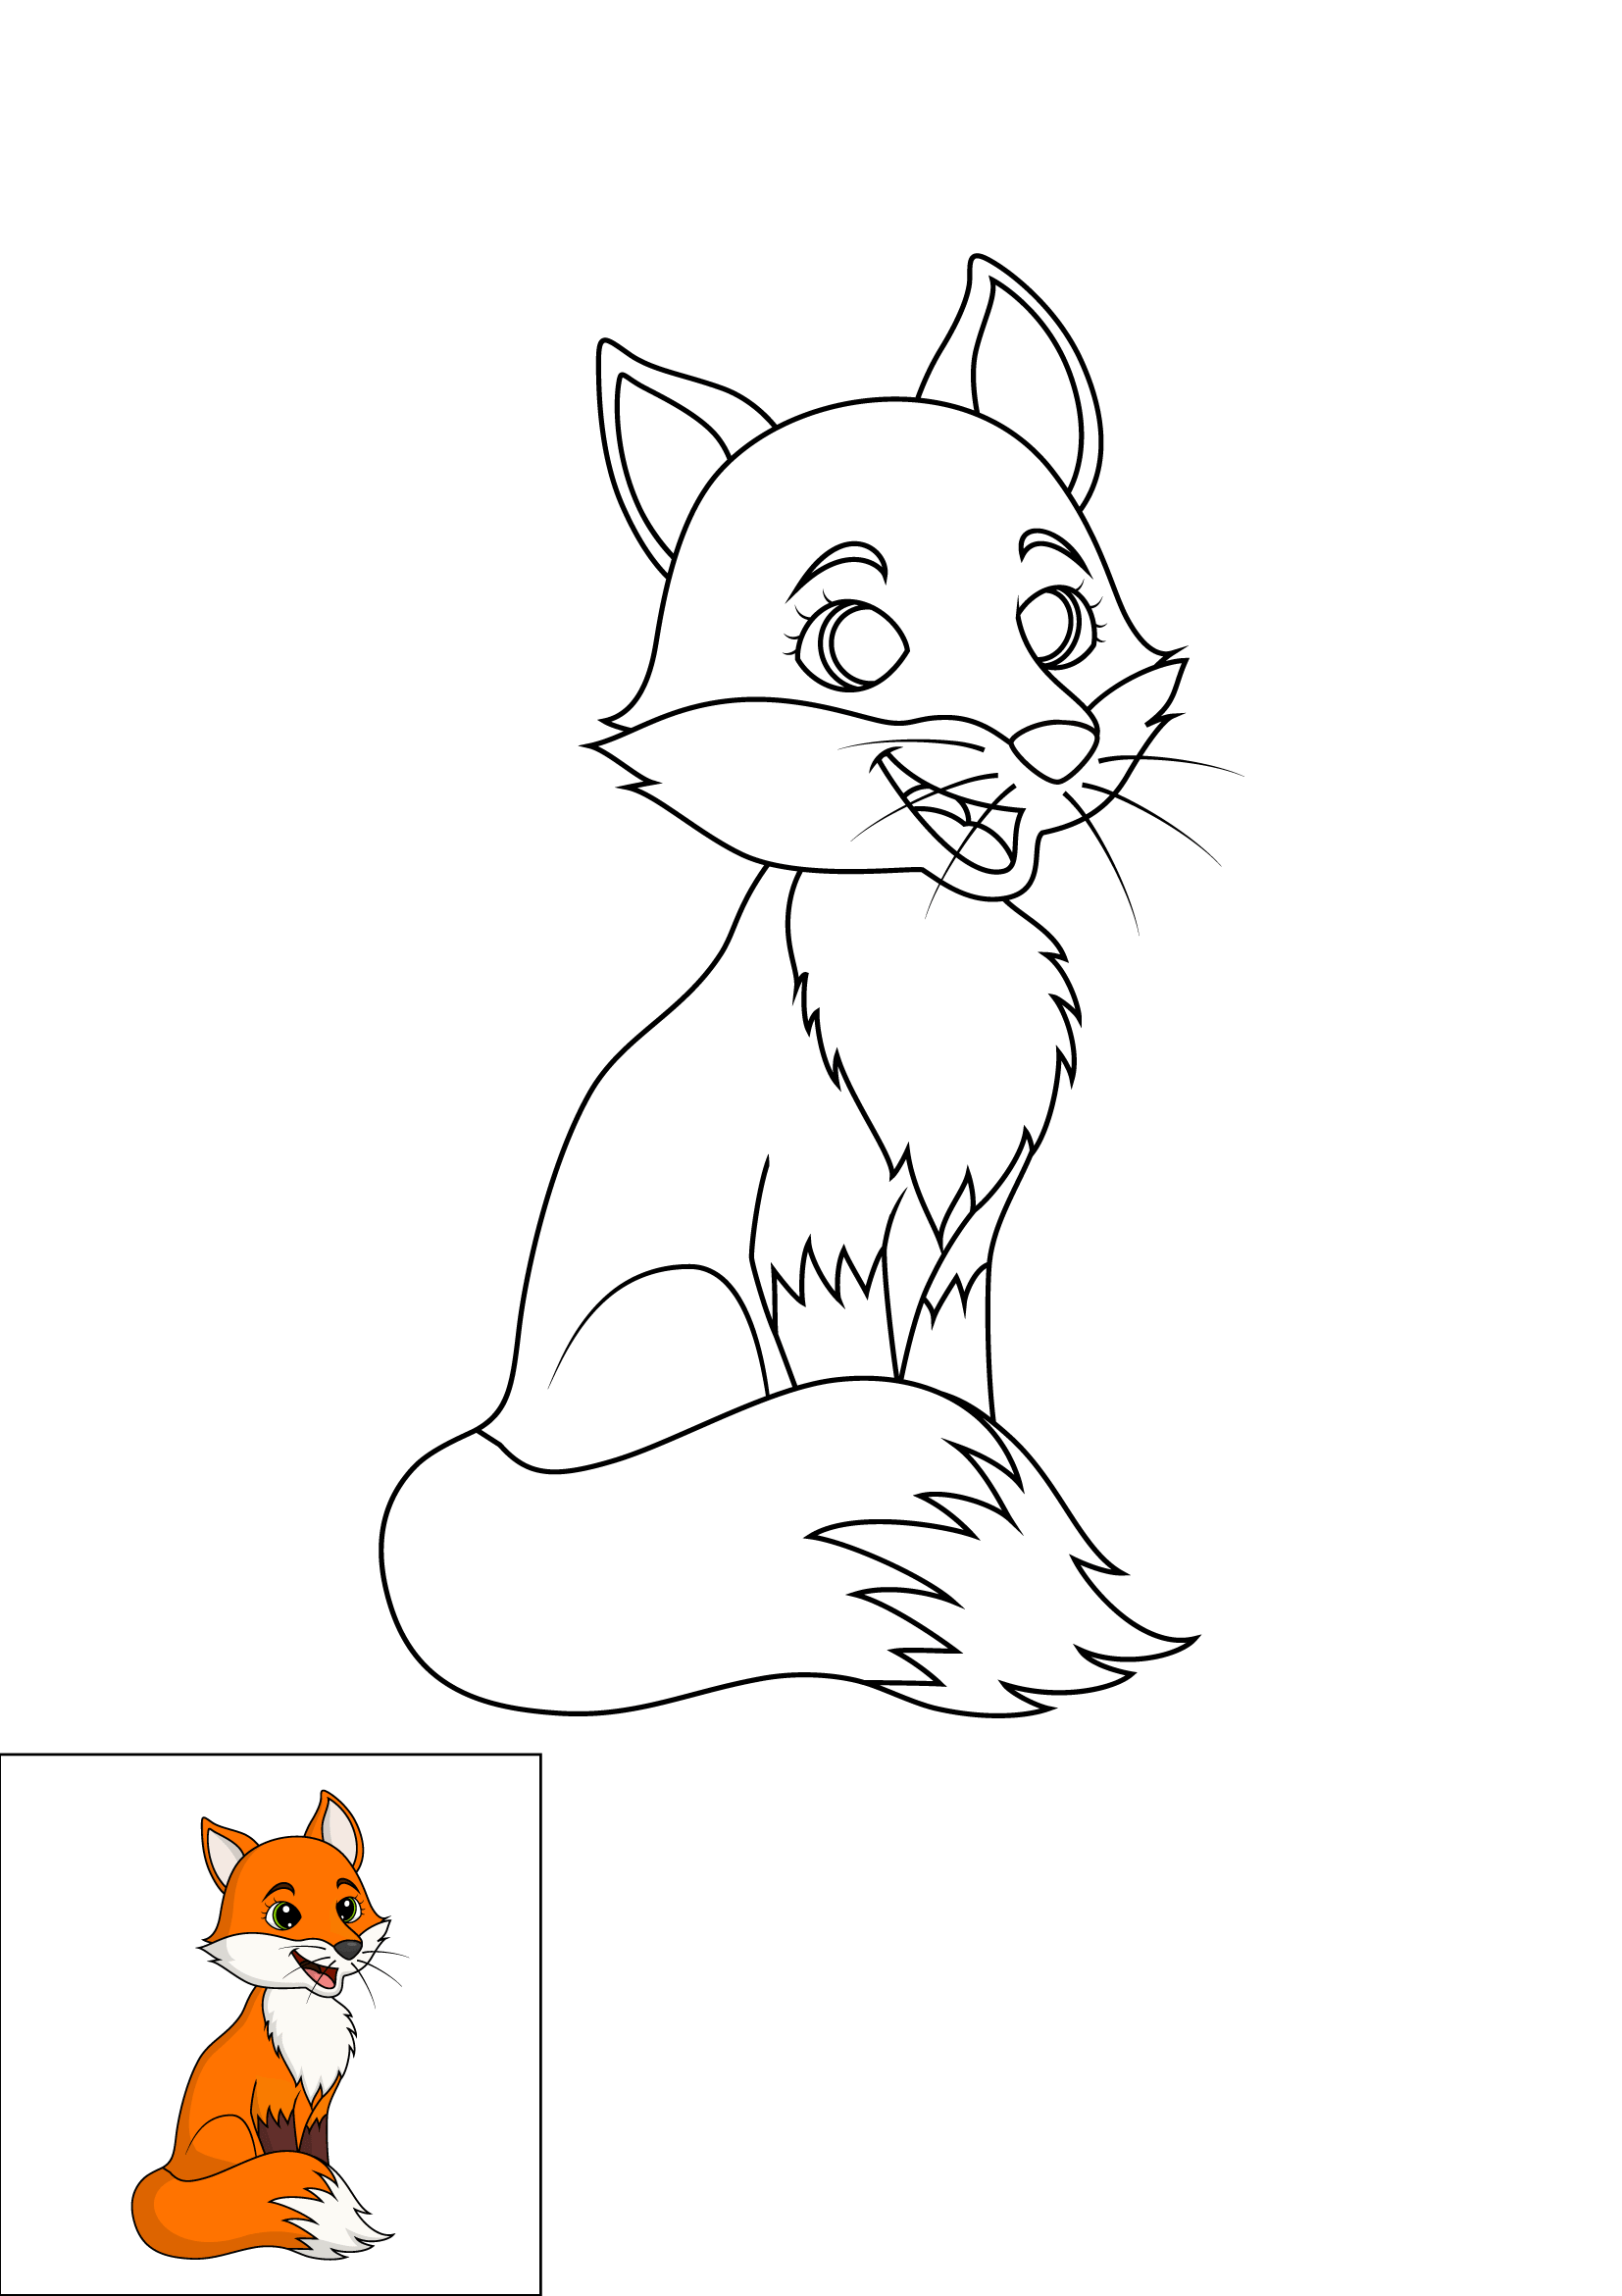 How to Draw A Cute Fox Step by Step Printable Color